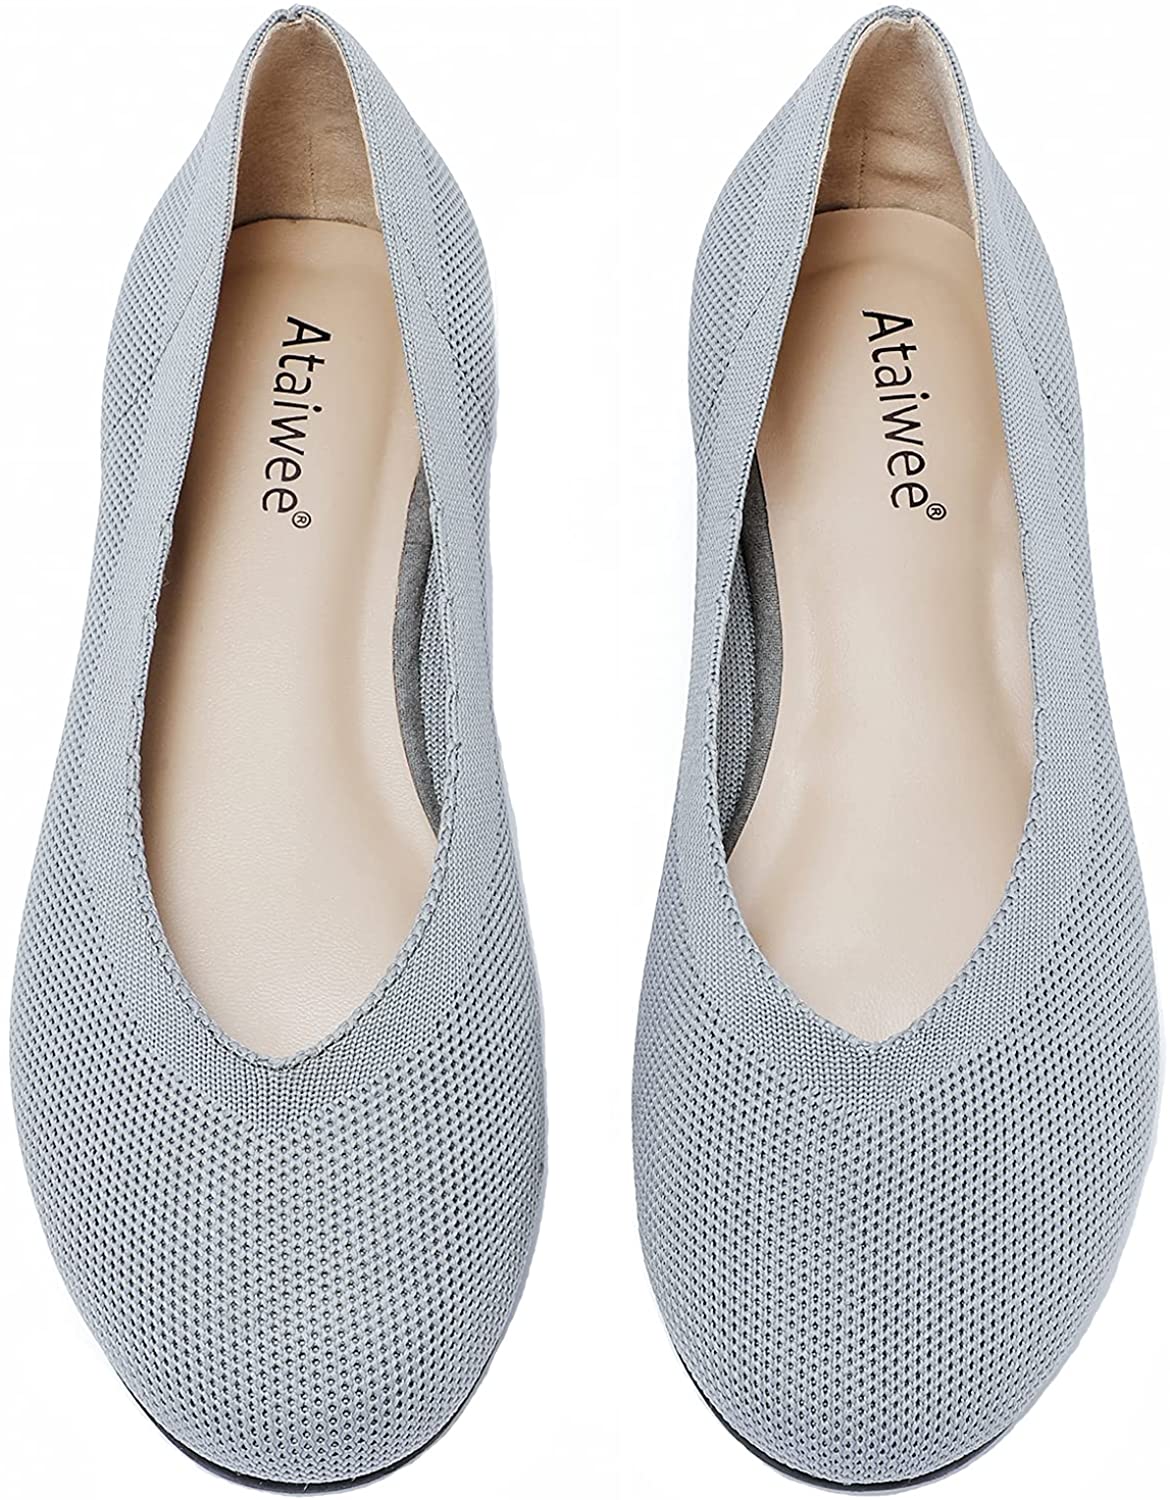 Plus Size Casual Pointy Toe Slip on Wide Ballet Shoes. Ataiwee Womens Wide Width Flat Shoes